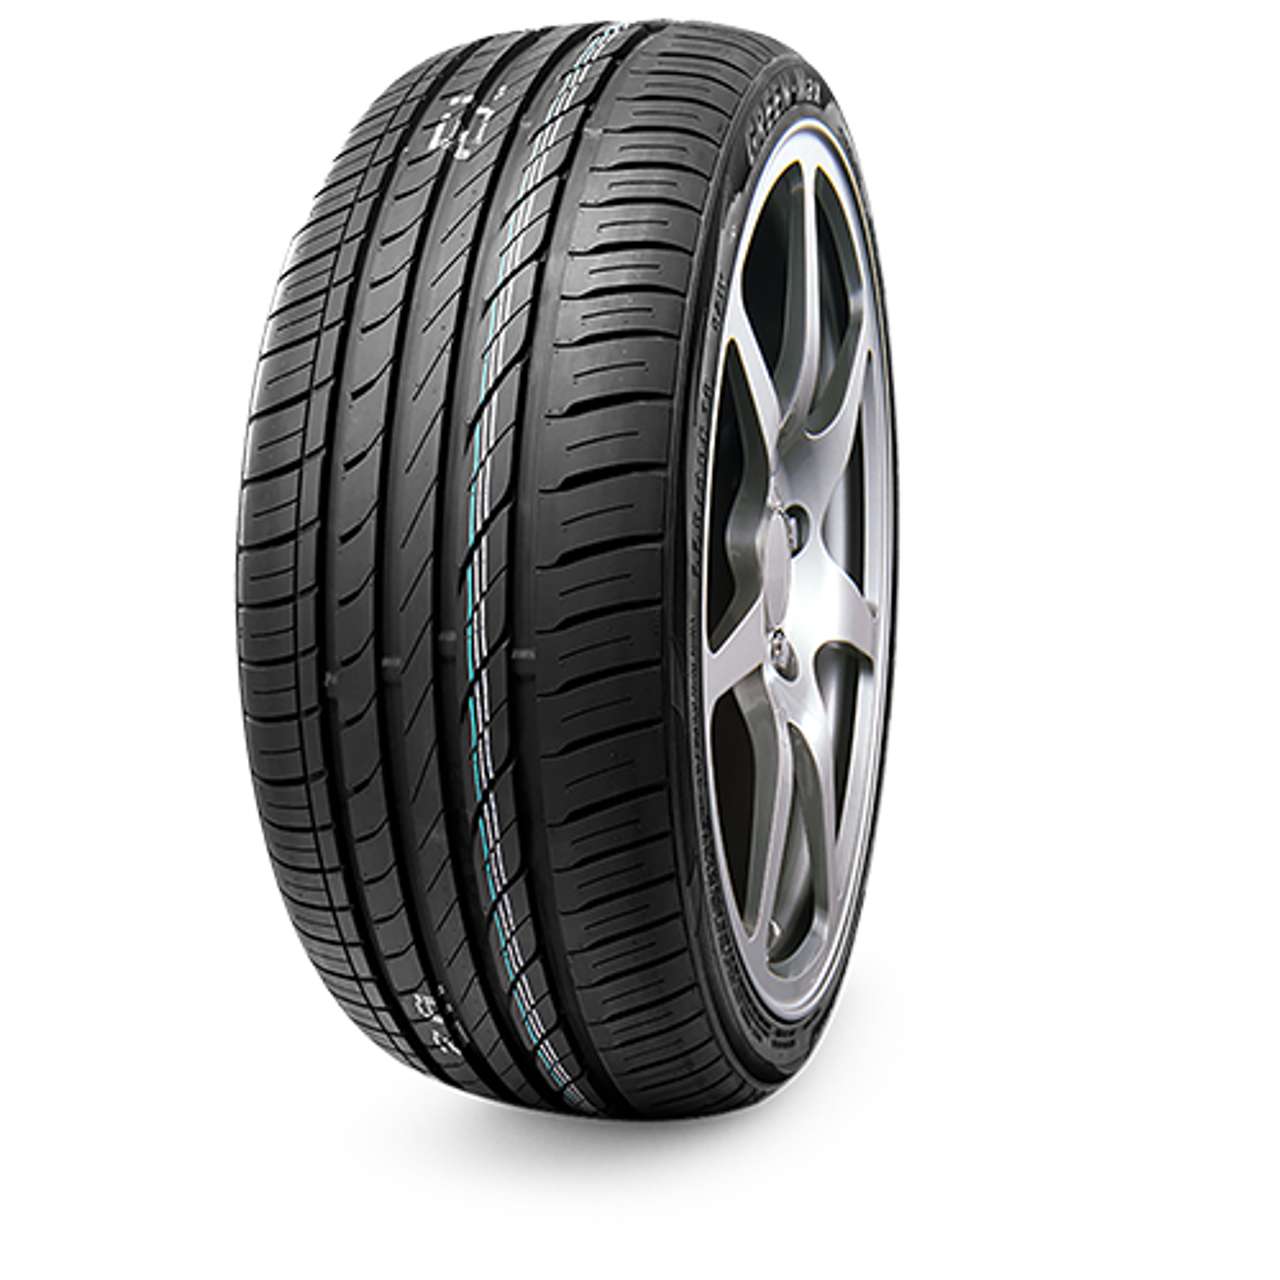 LINGLONG GREEN-MAX 225/45R17 94W MFS BSW von LINGLONG